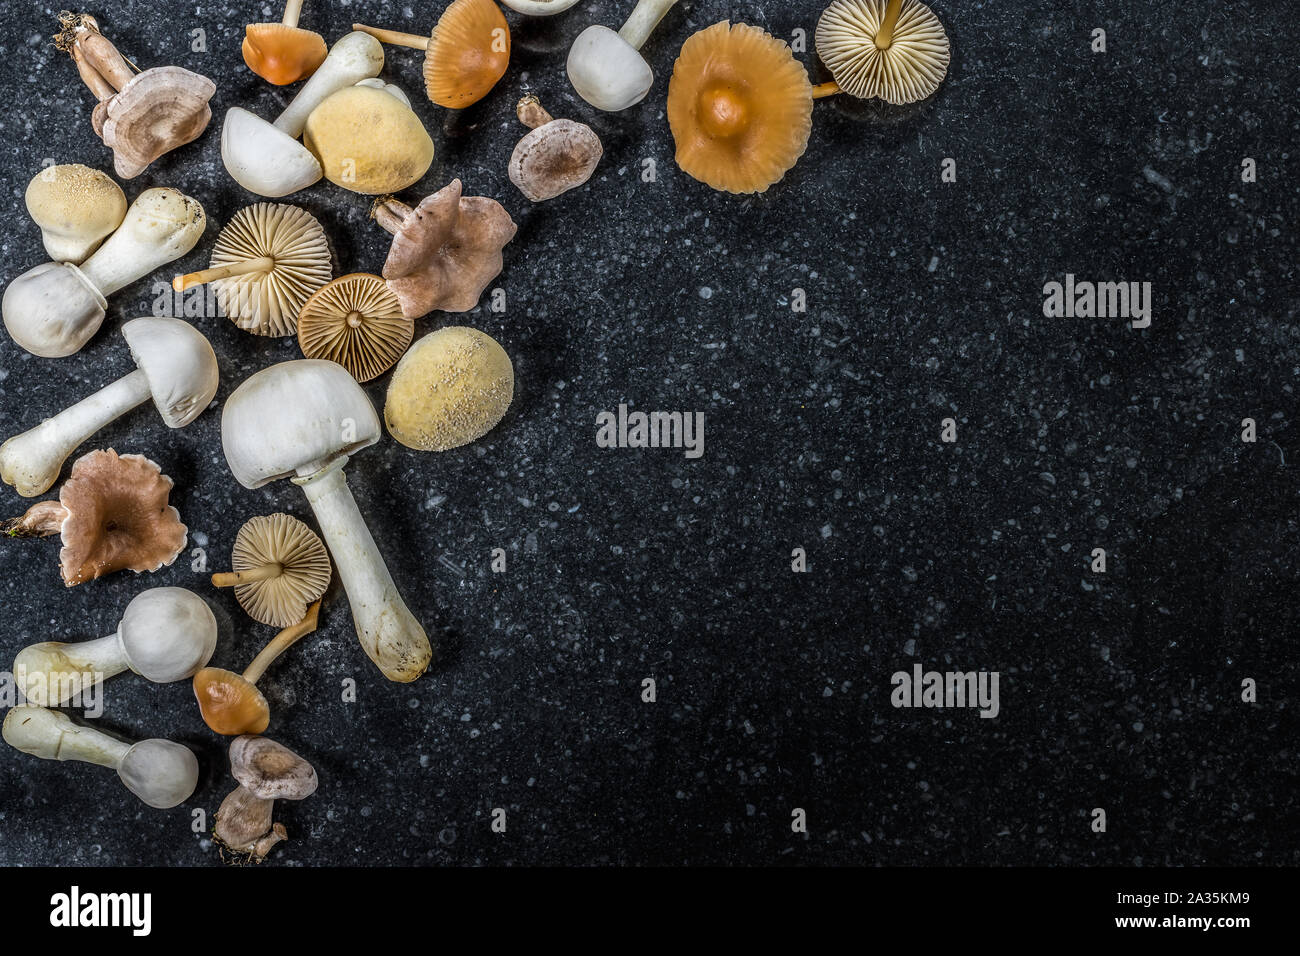 A group of different edible and poisonous mushrooms. Autumn background. Stock Photo